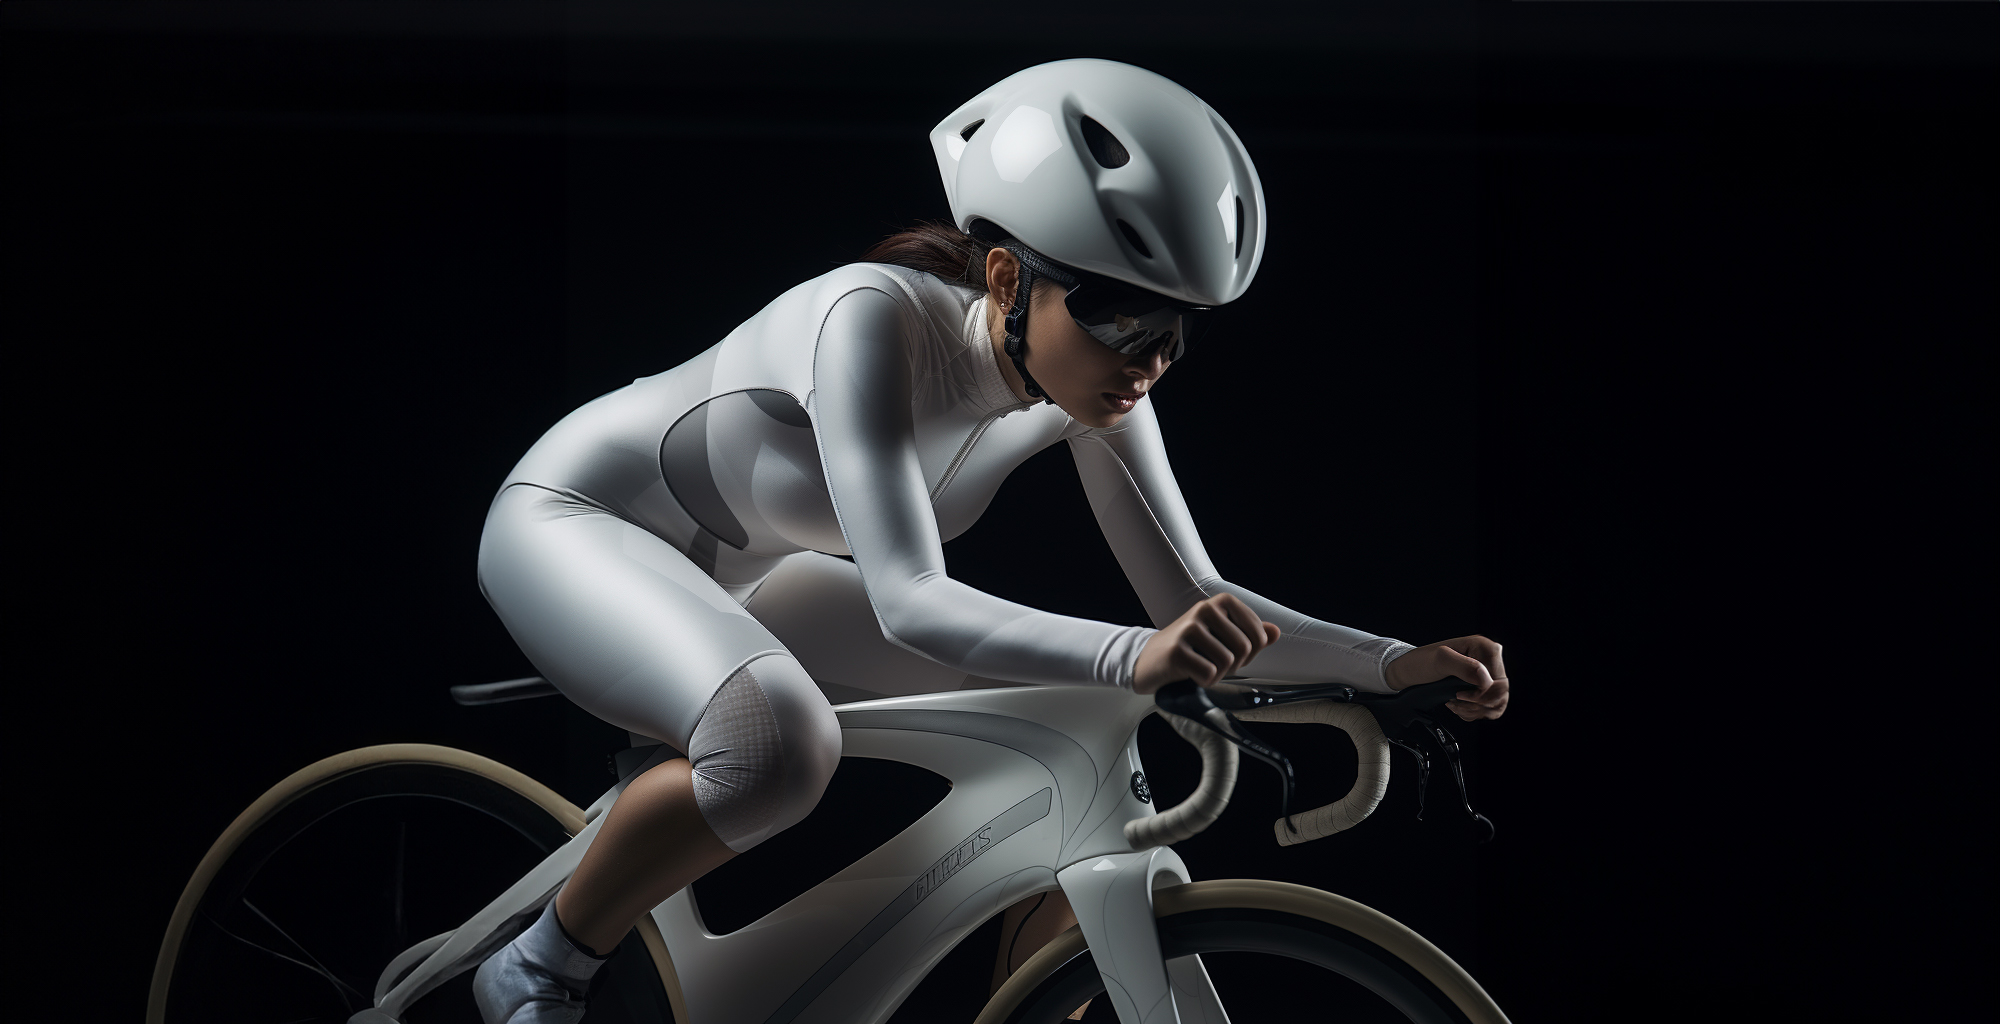 We Asked AI to Predict the Bike Industry in 2024, but Ron’s Not so Sure…